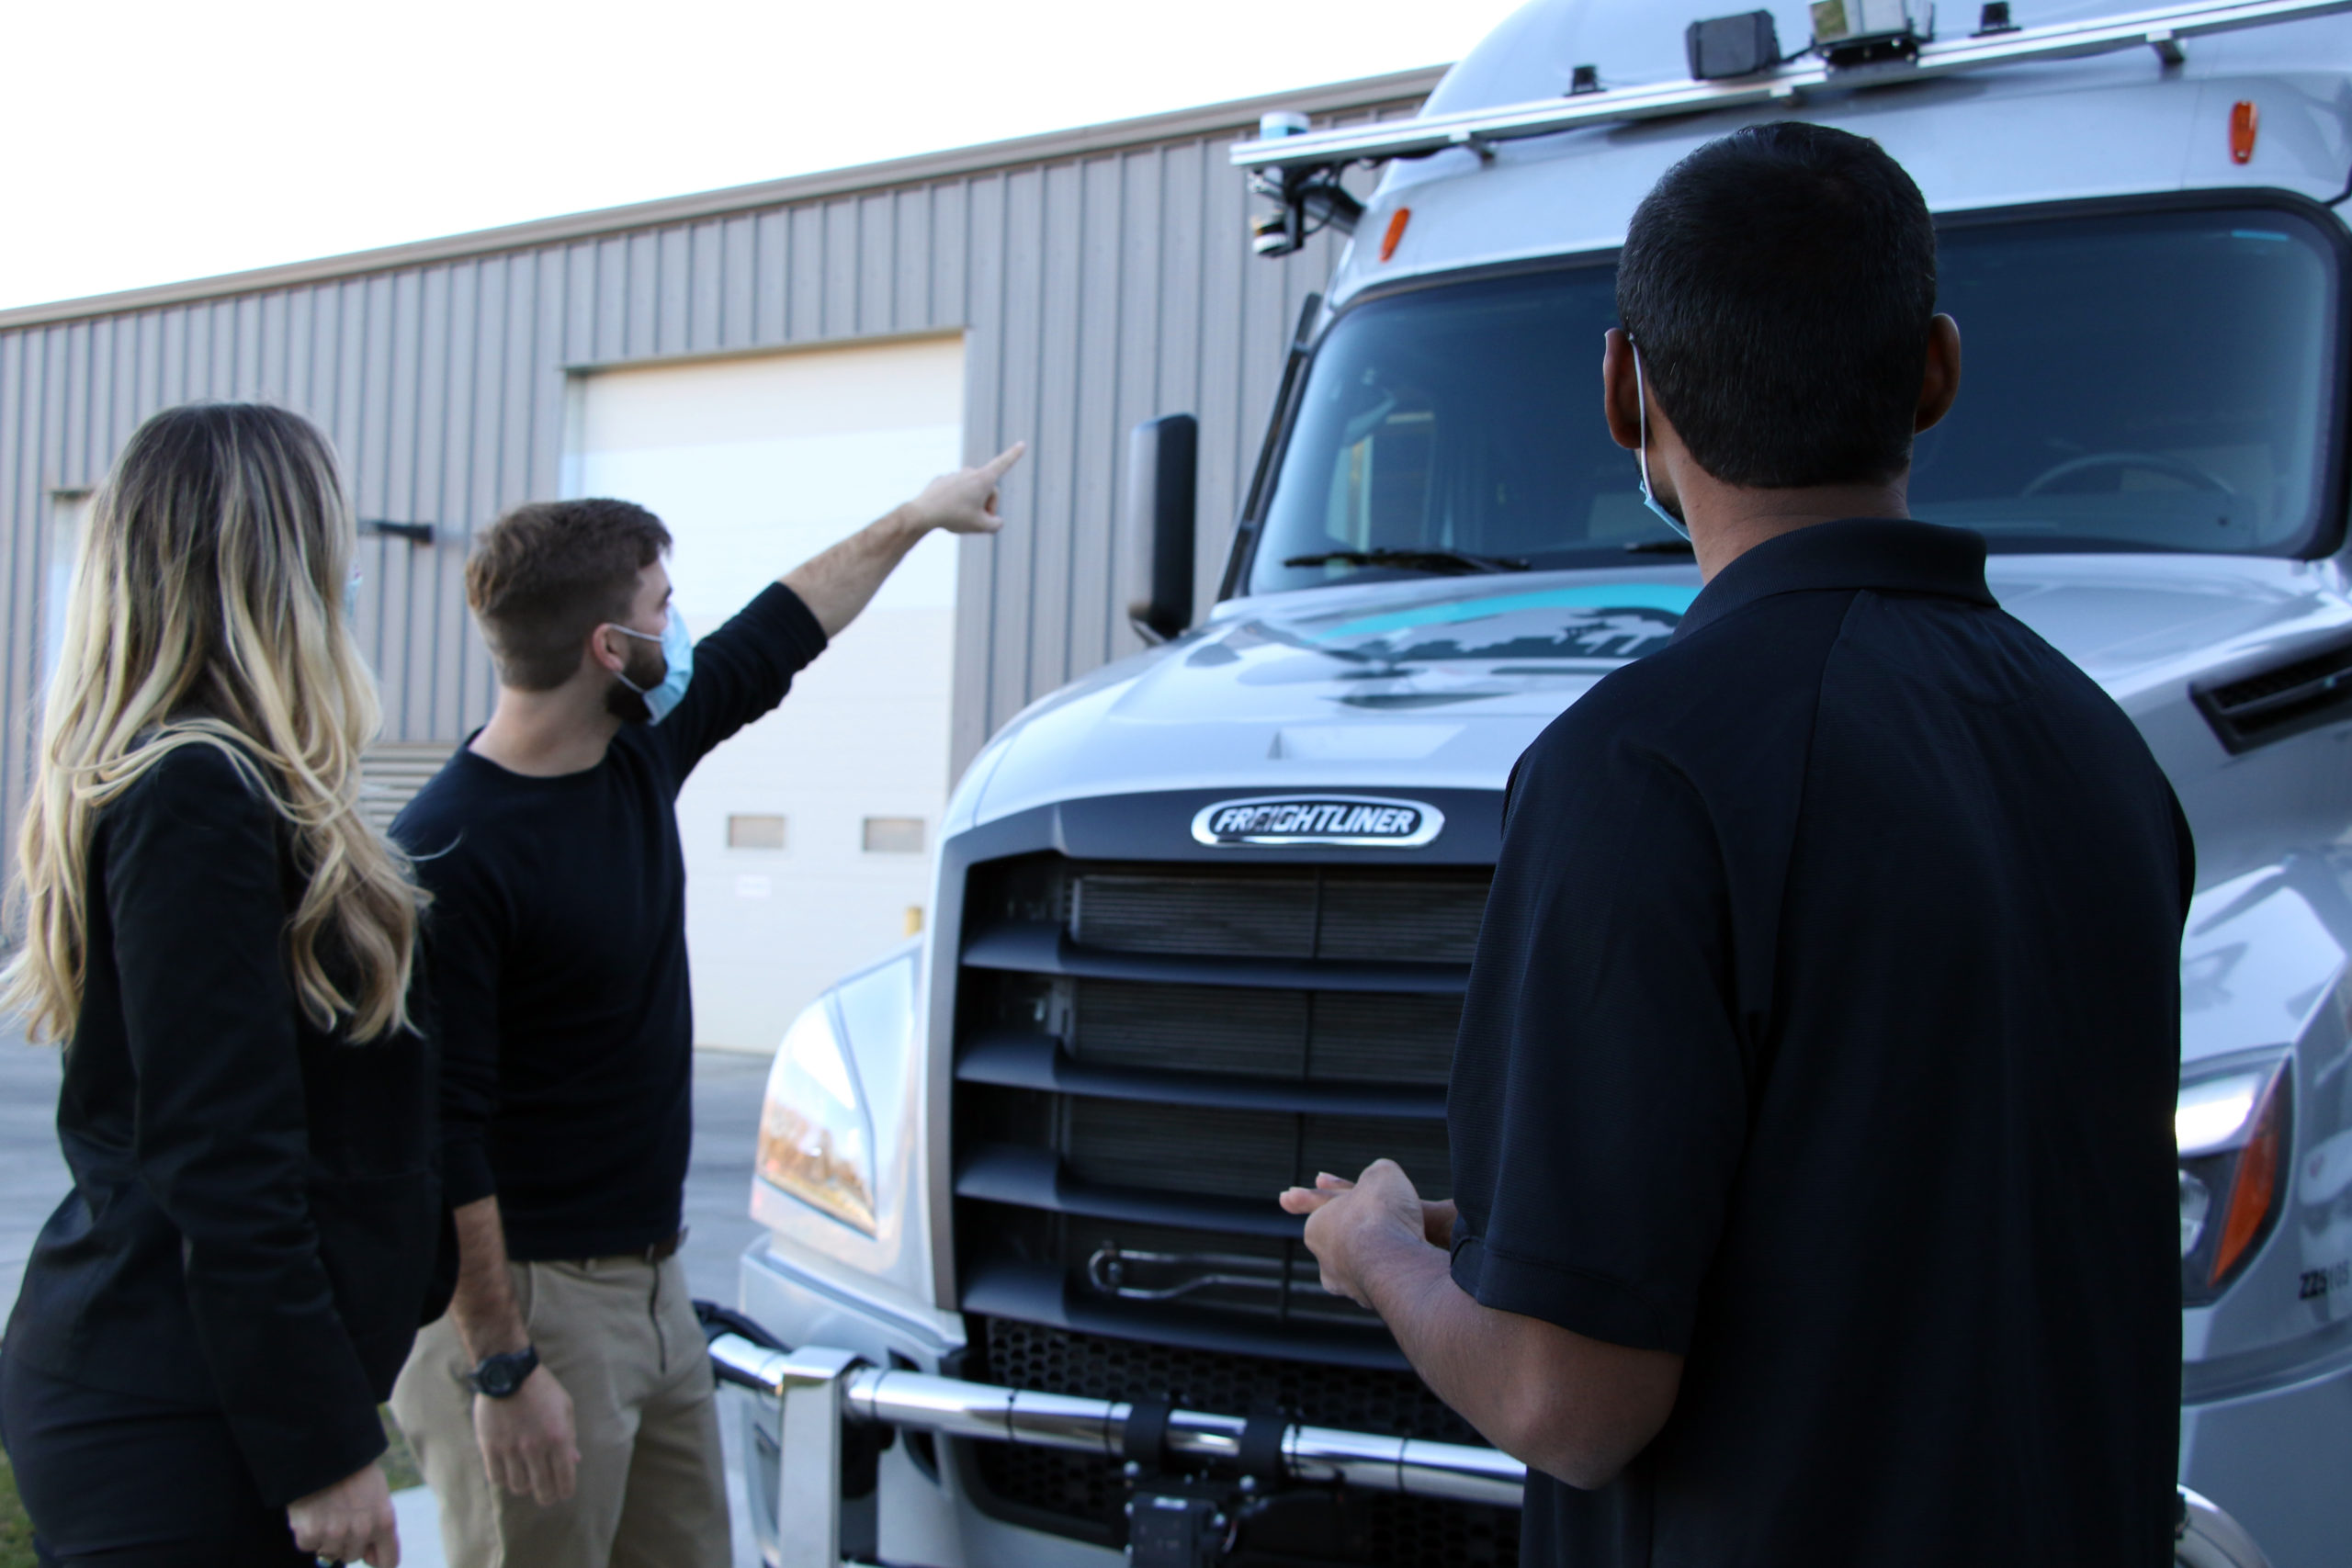 Vehicle Testers perform a walkaround of a Torc truck before testing